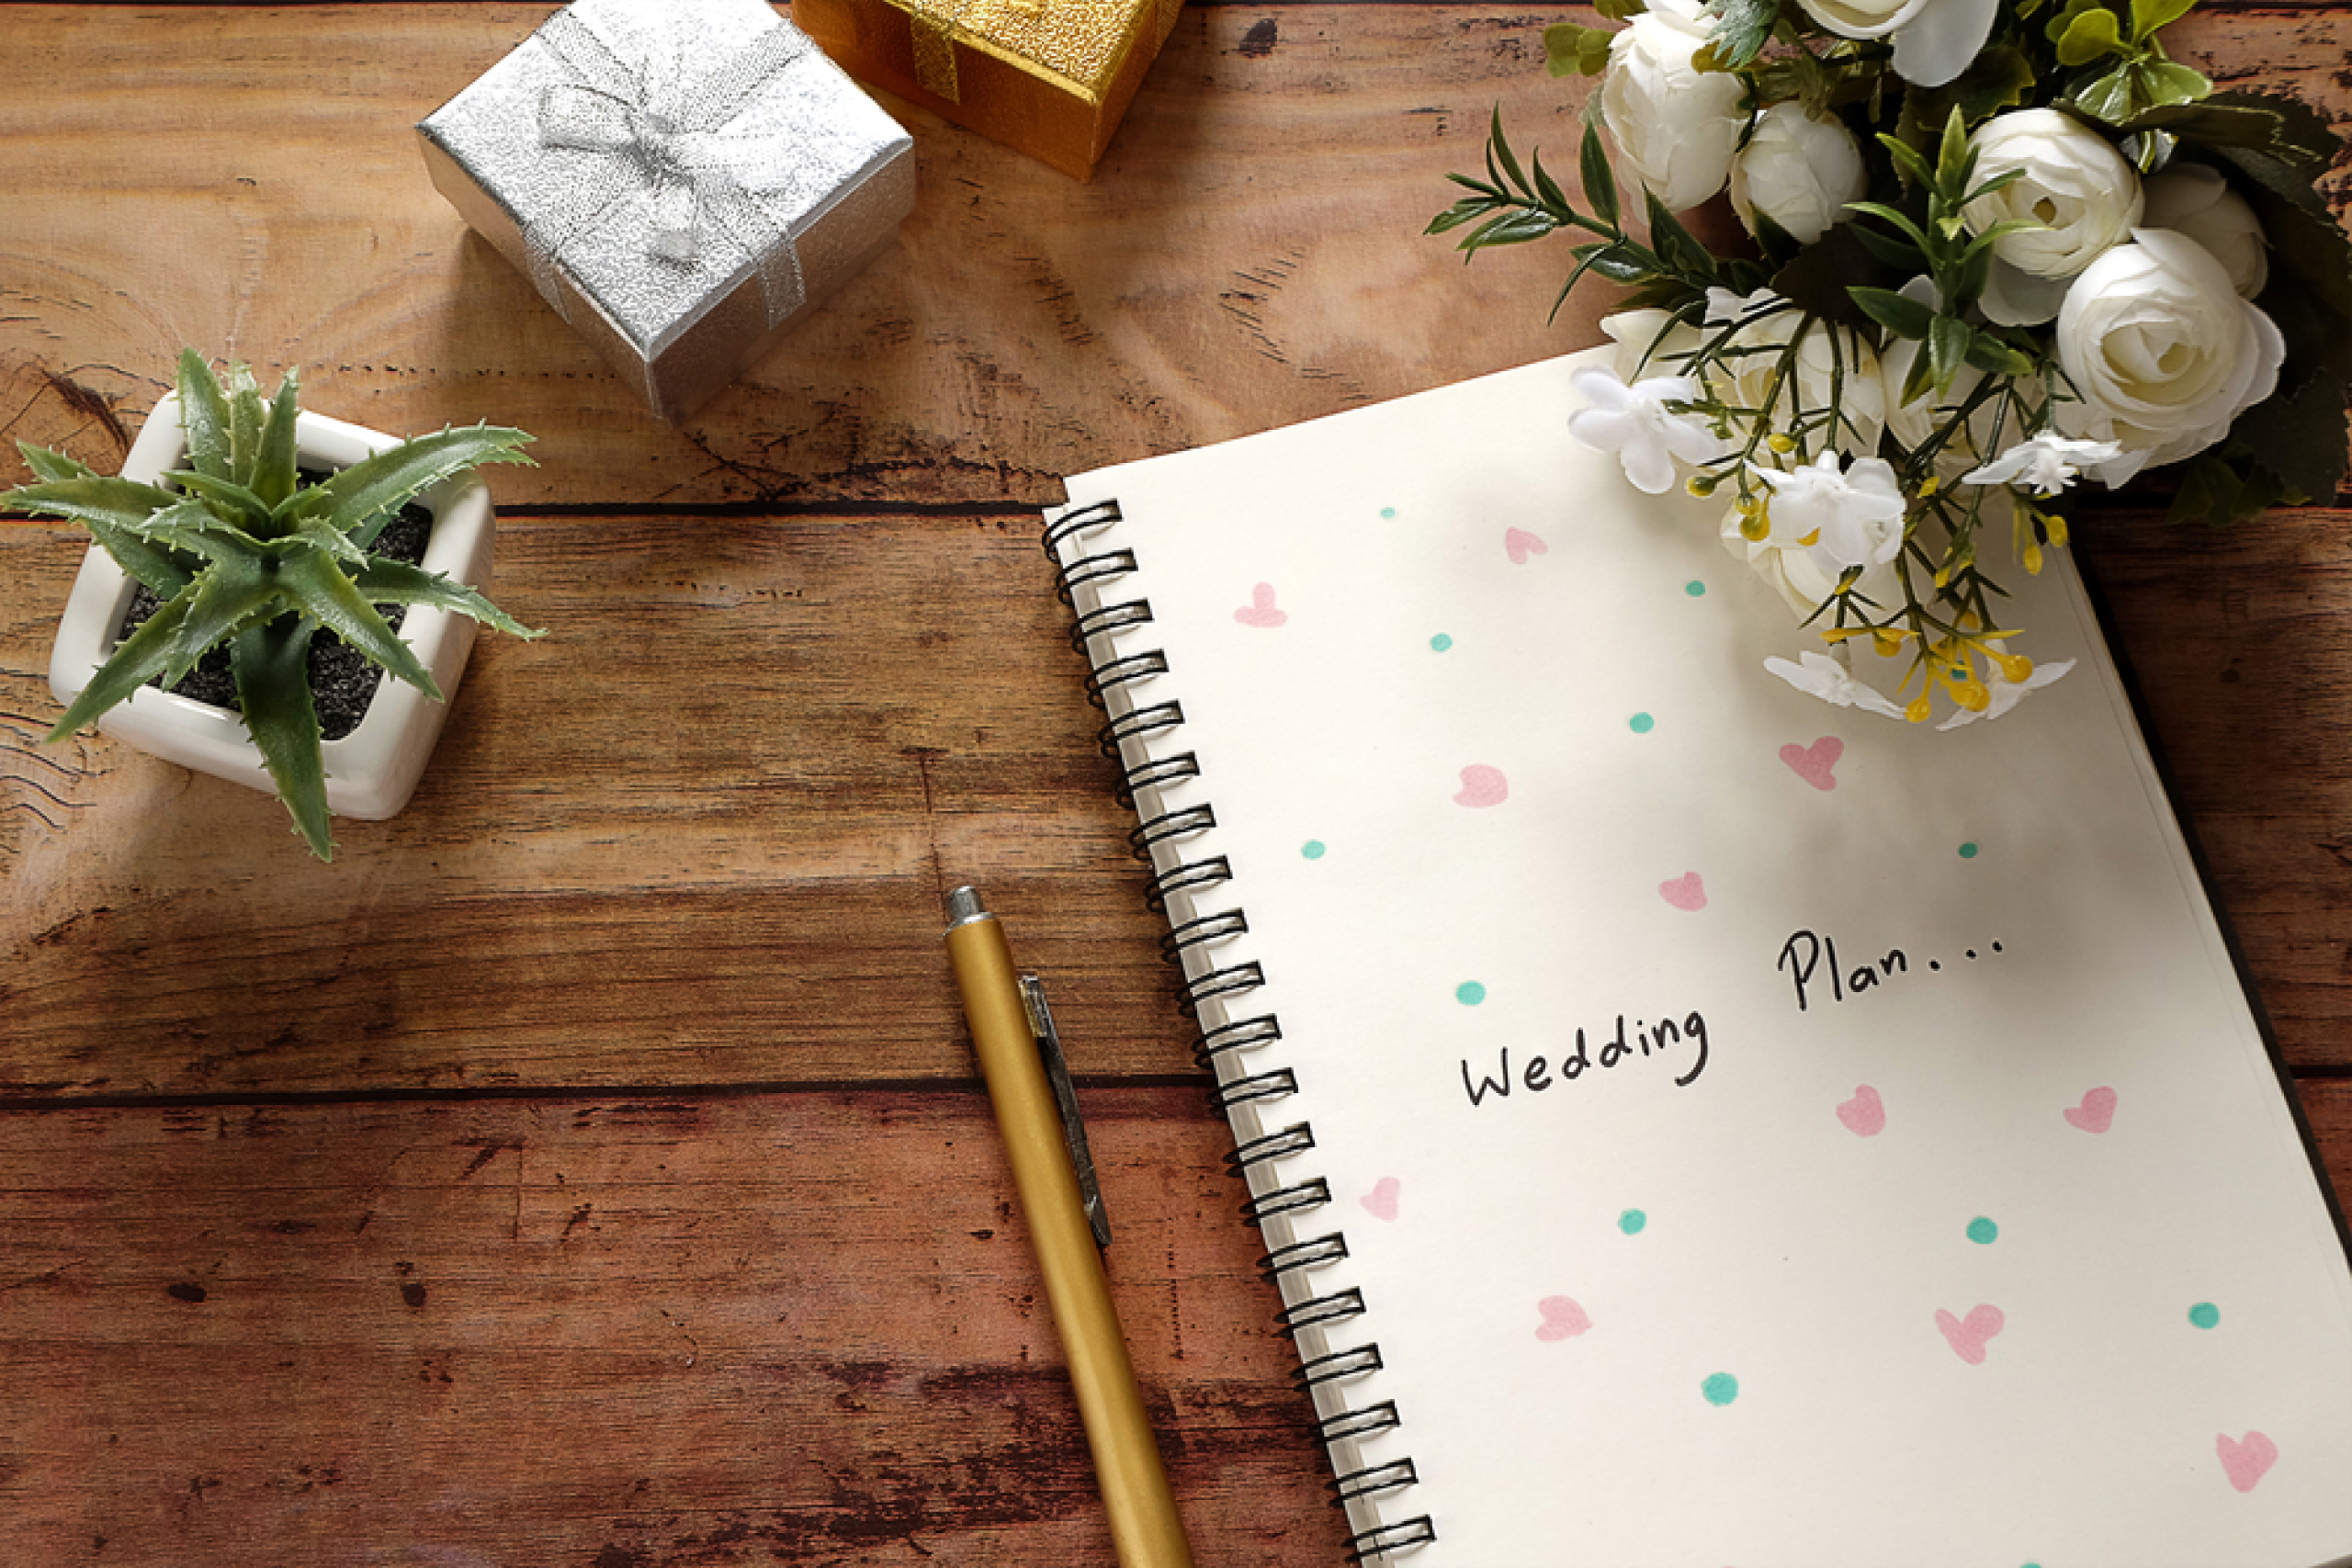 Tips for stress-free wedding planning